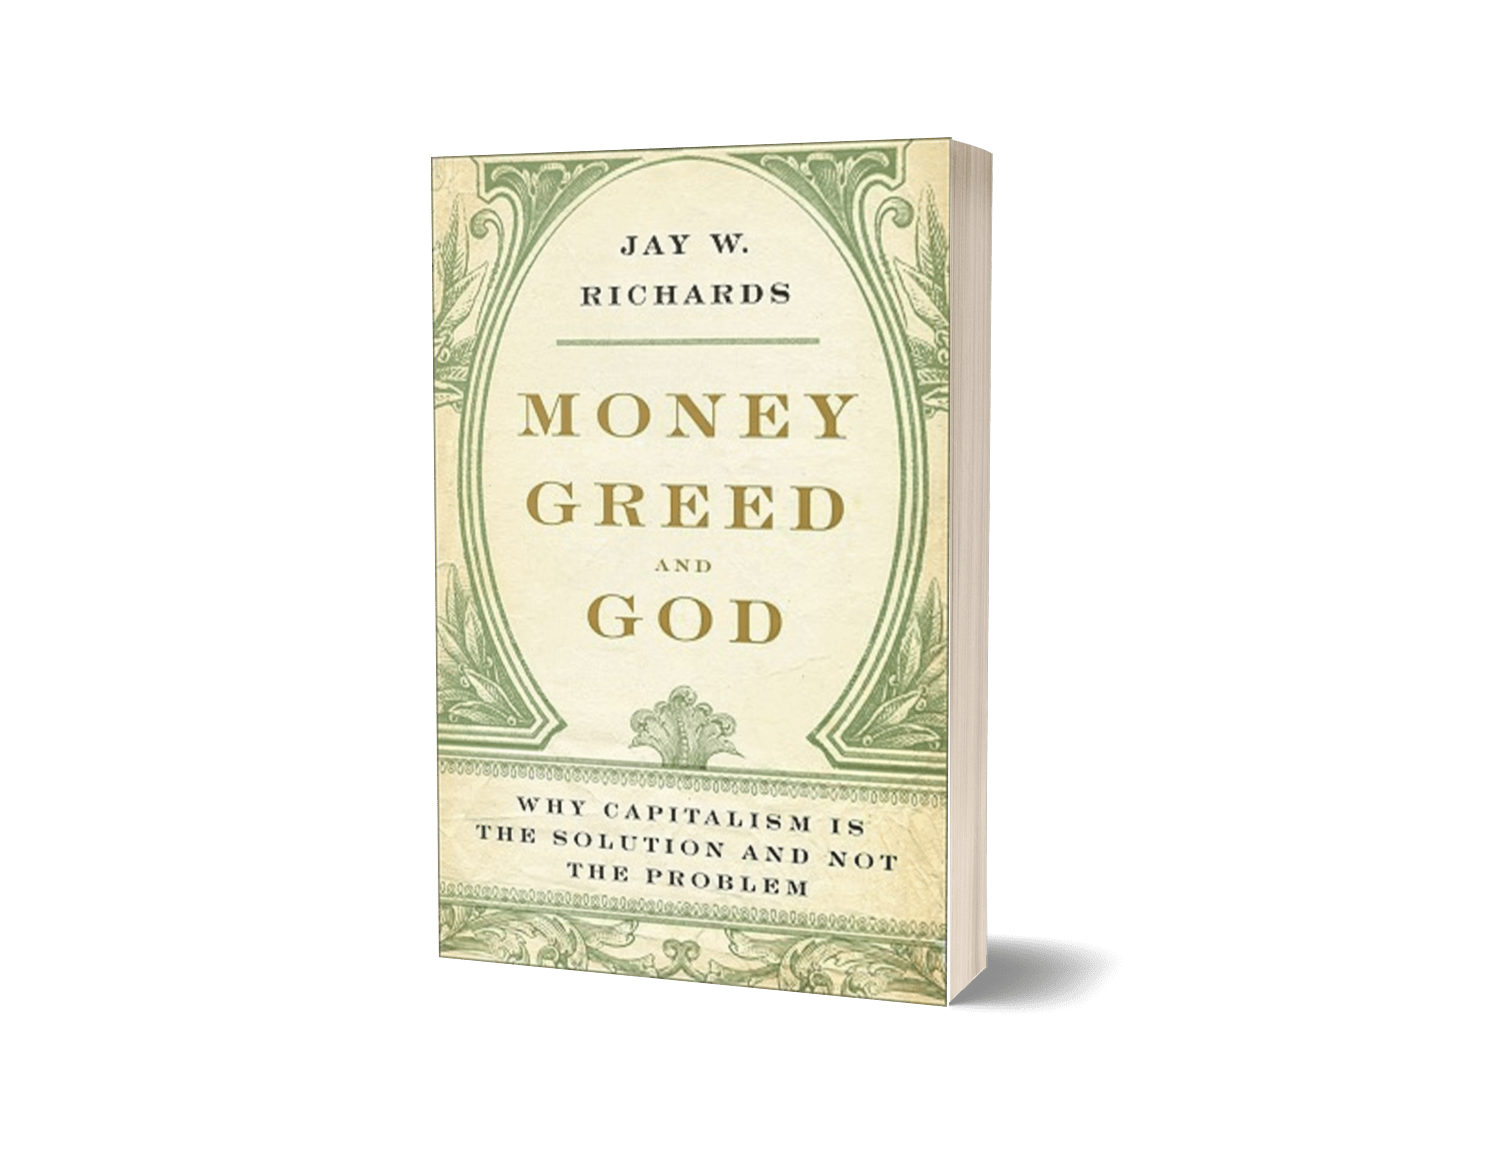 Money Greed and God by Jay W. Richards